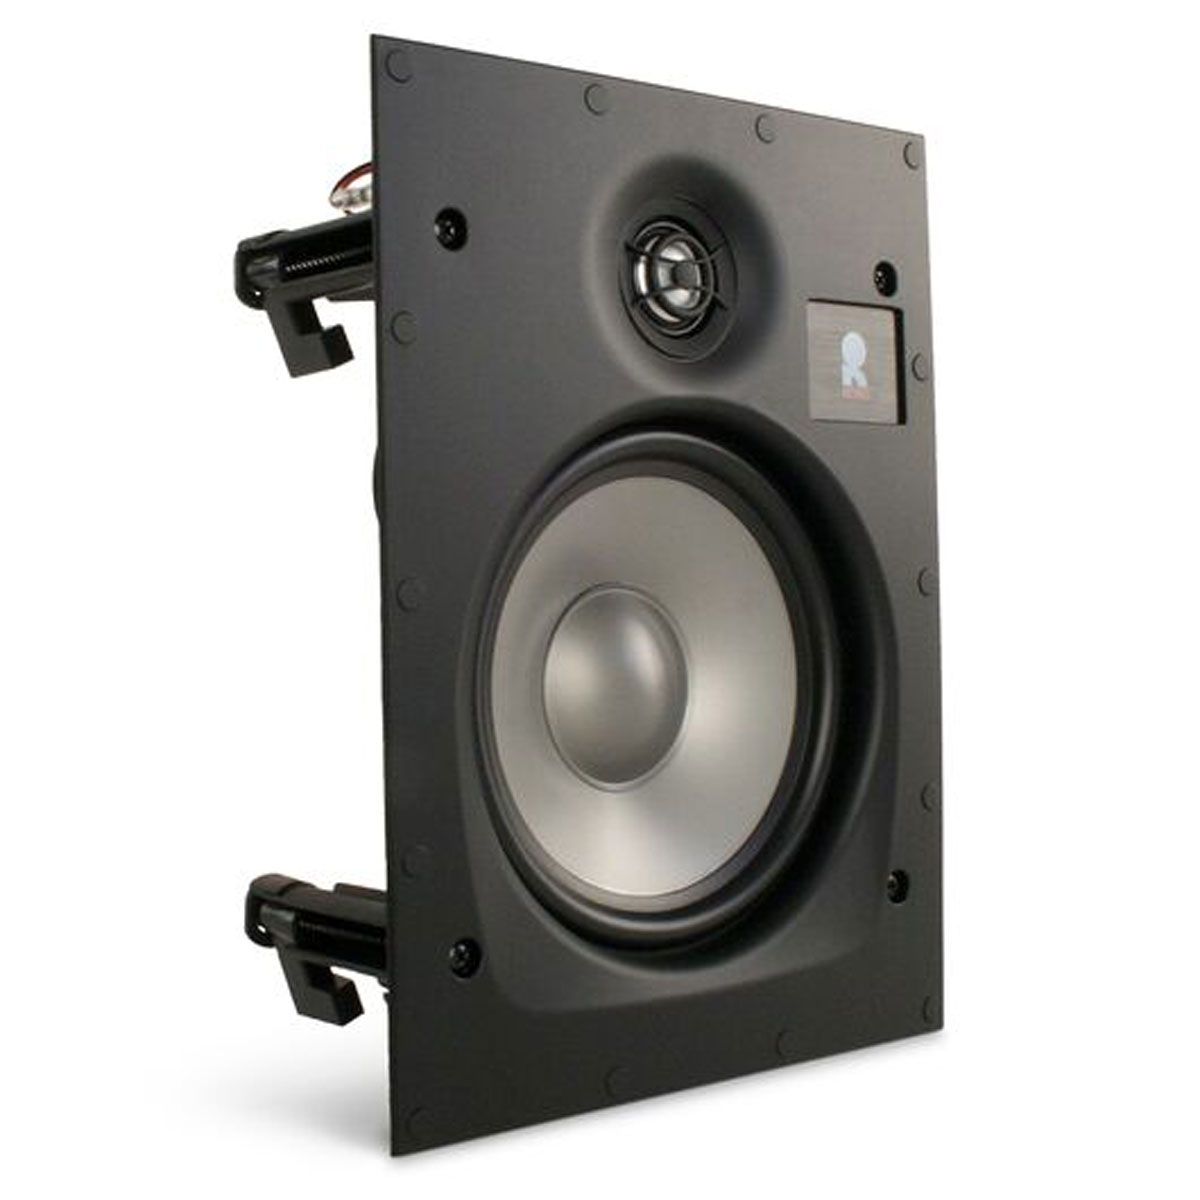 Revel W363 In-Wall Speaker - front angled view